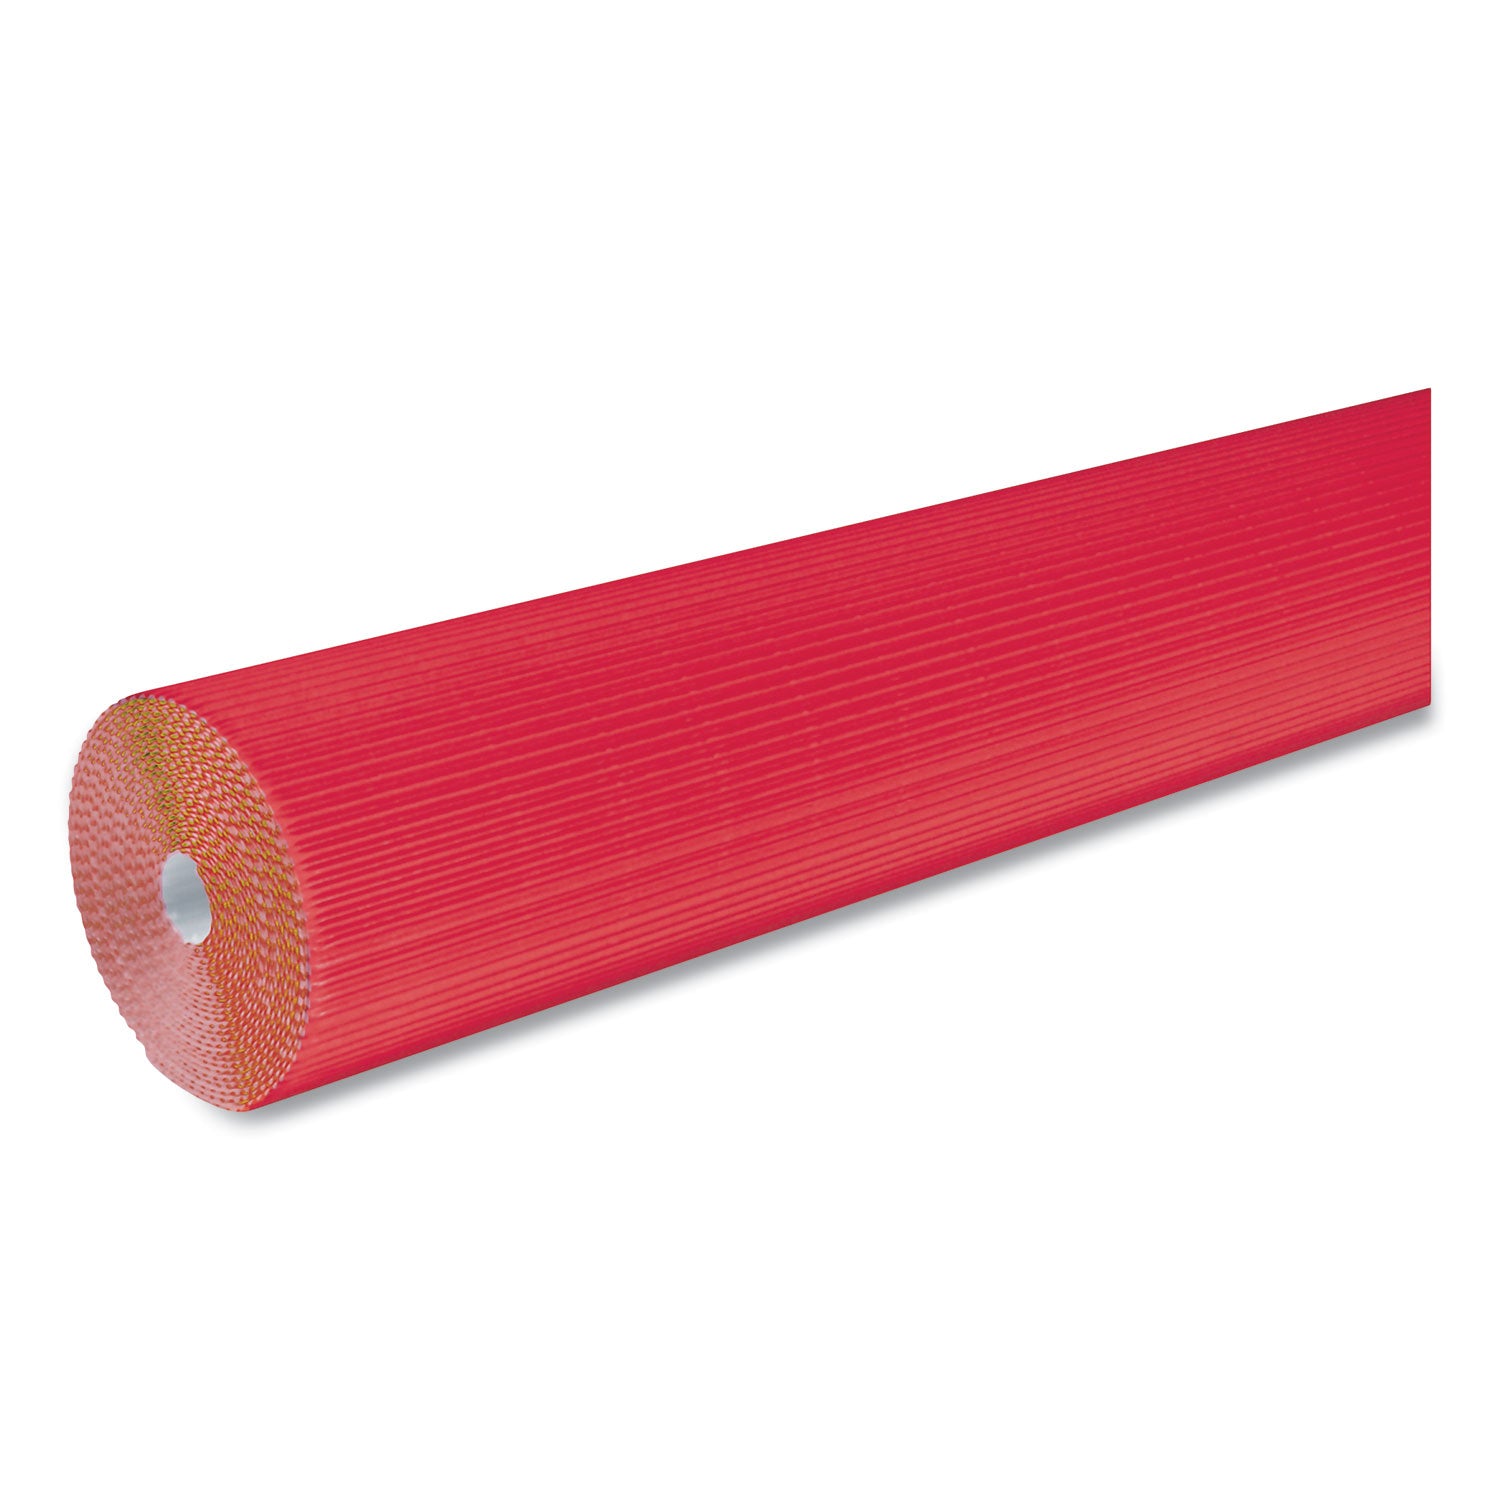 corobuff-corrugated-paper-roll-48-x-25-ft-flame-red_pac0011031 - 2